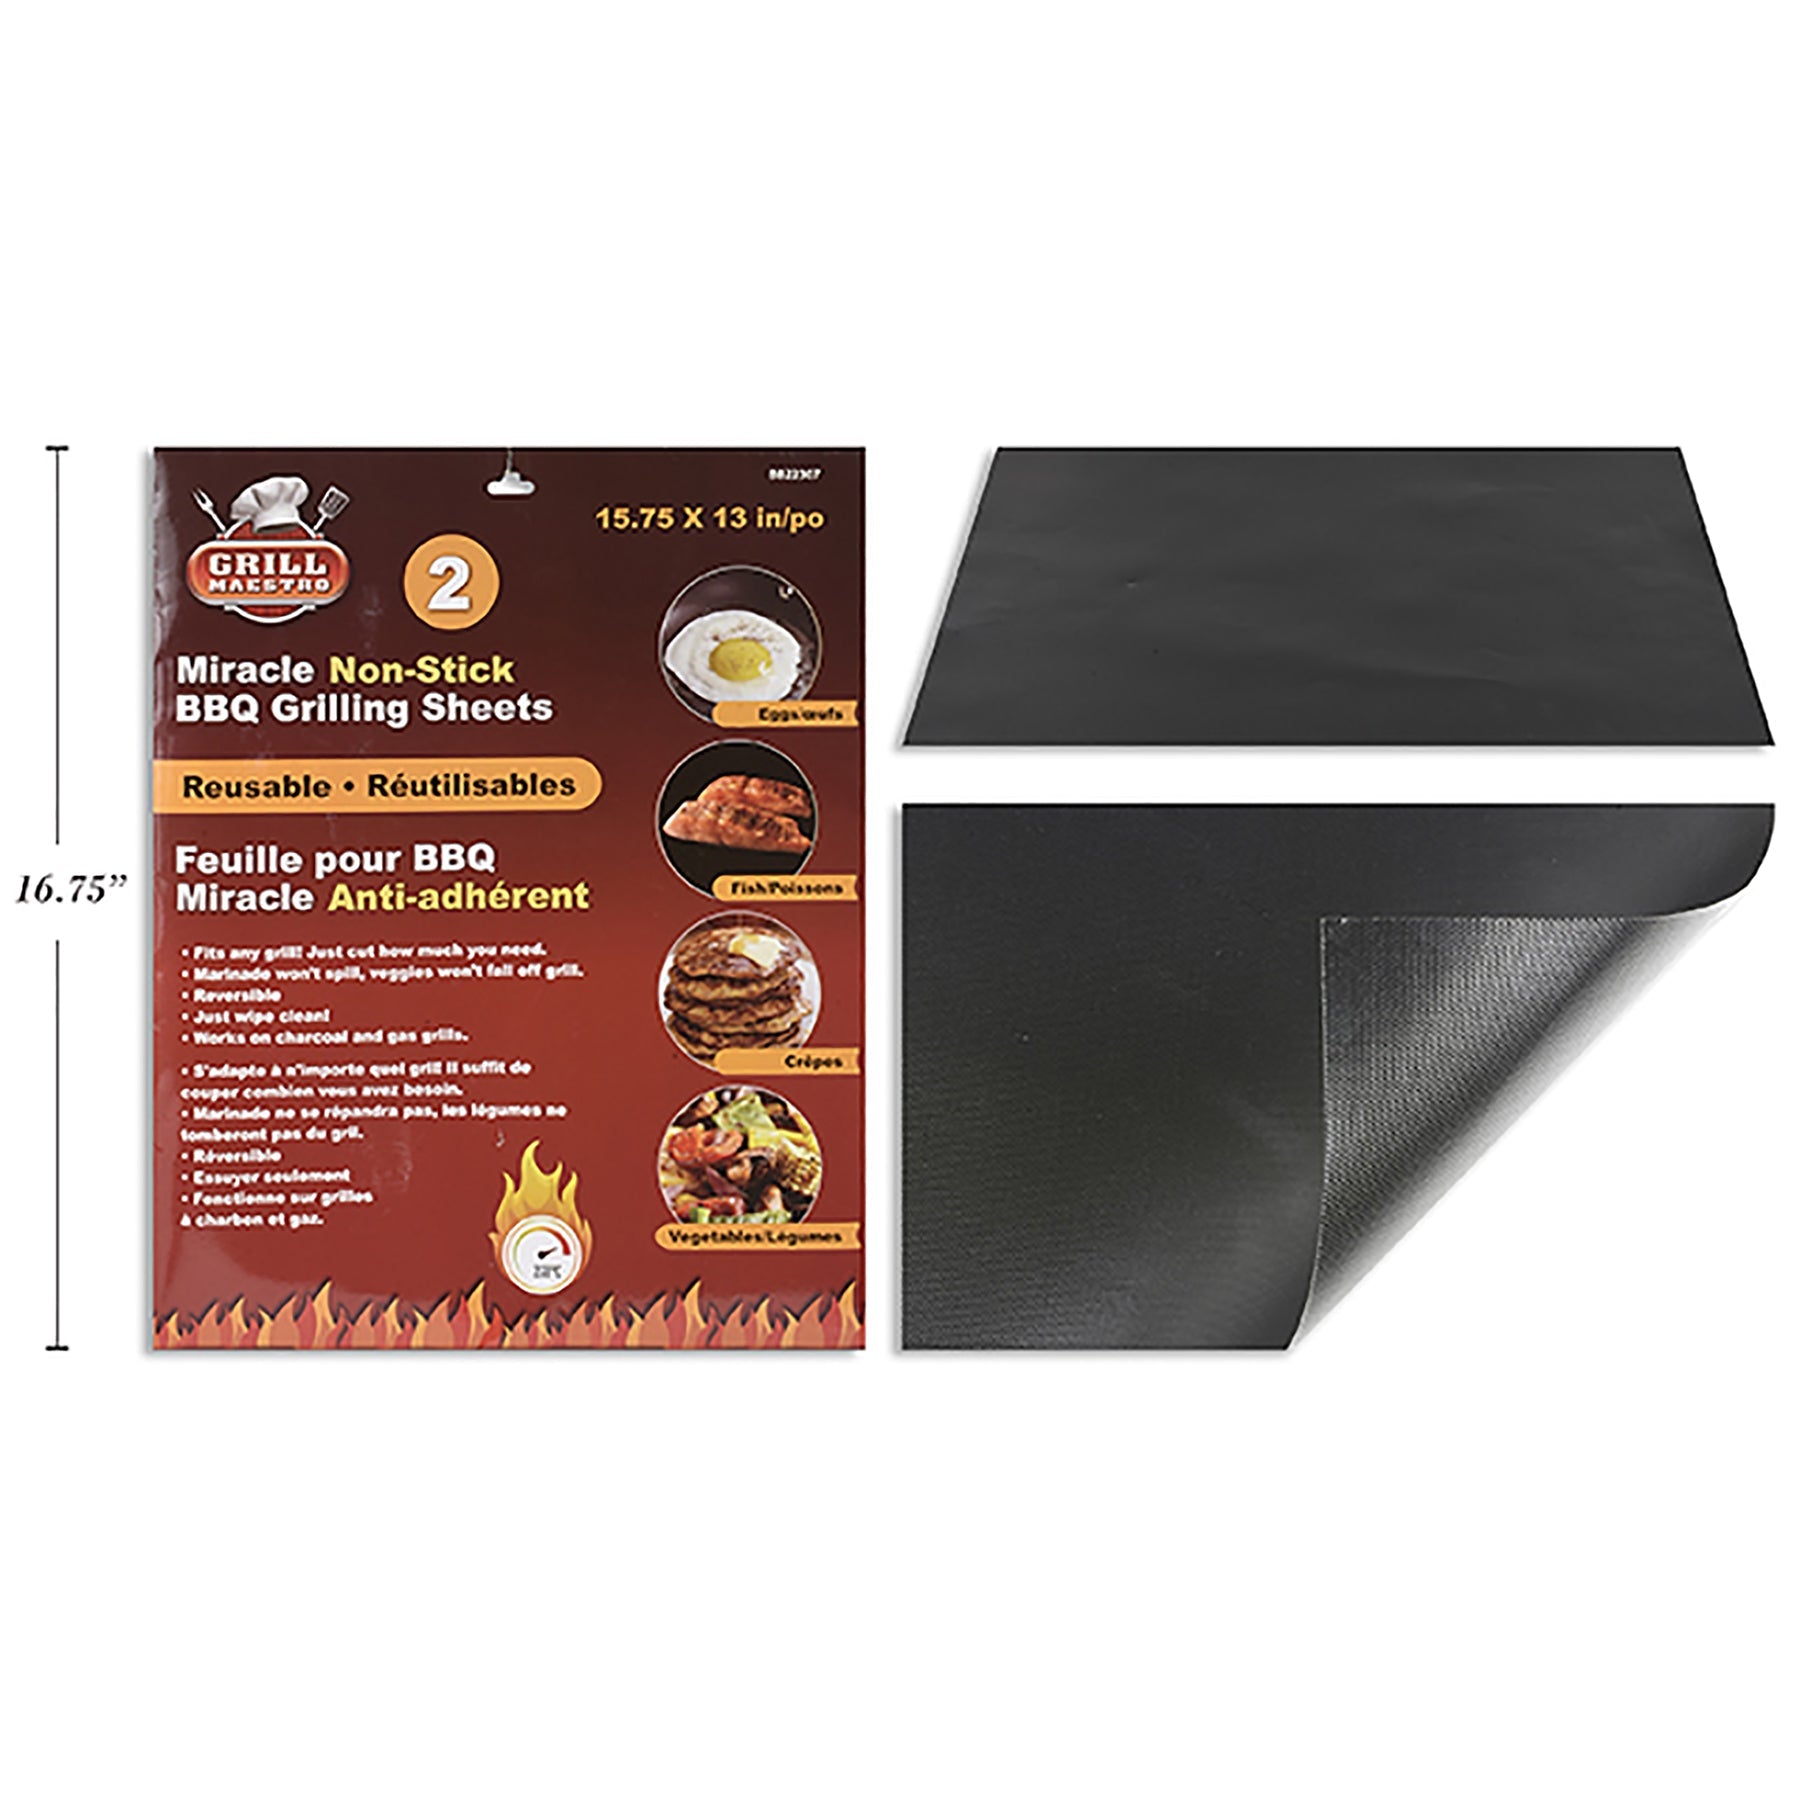 BBQ 2 Miracle Non-Stick Grilling Sheets Reusable 15.75x13in